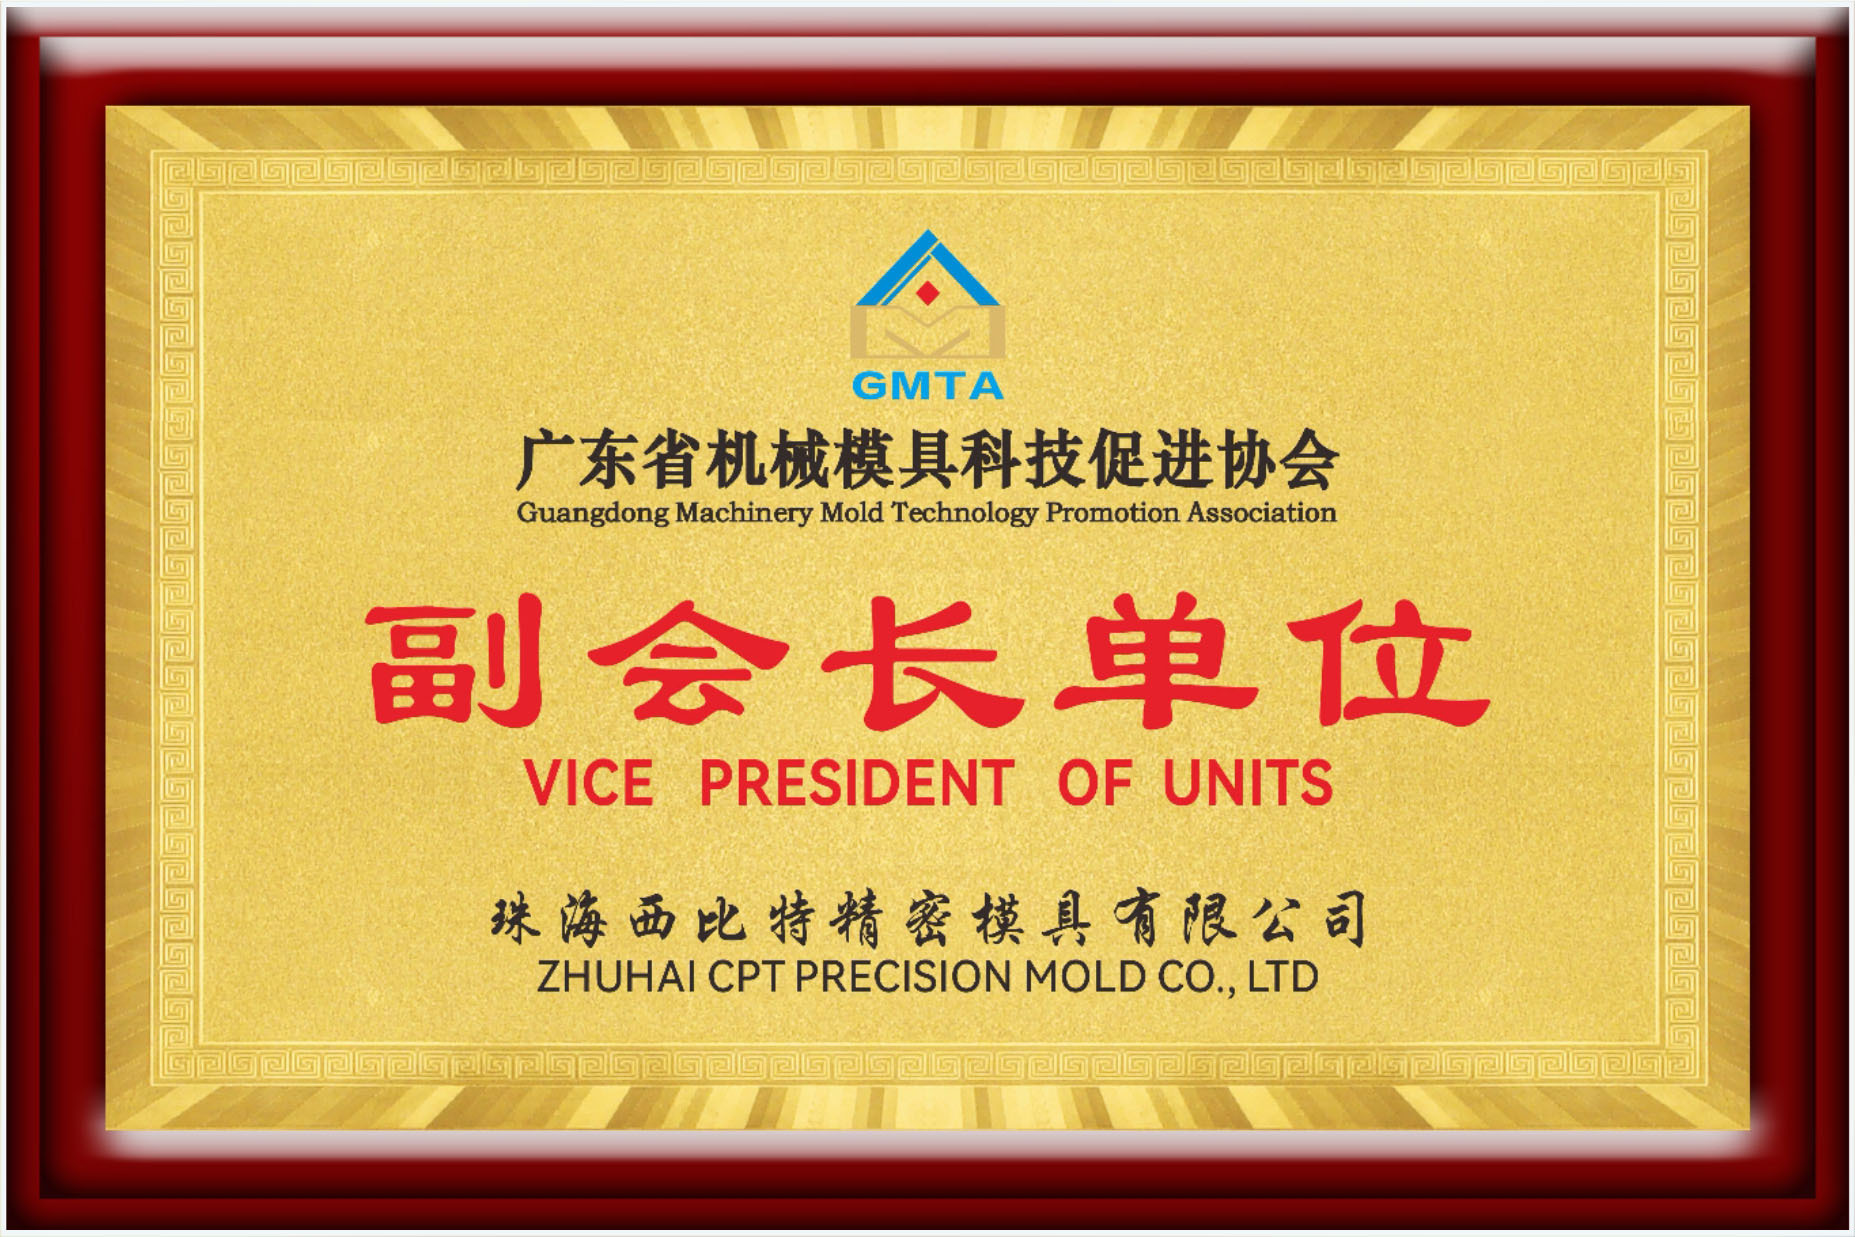 Vice President Unit of Guangdong Machinery Mold Technology Promotion Association